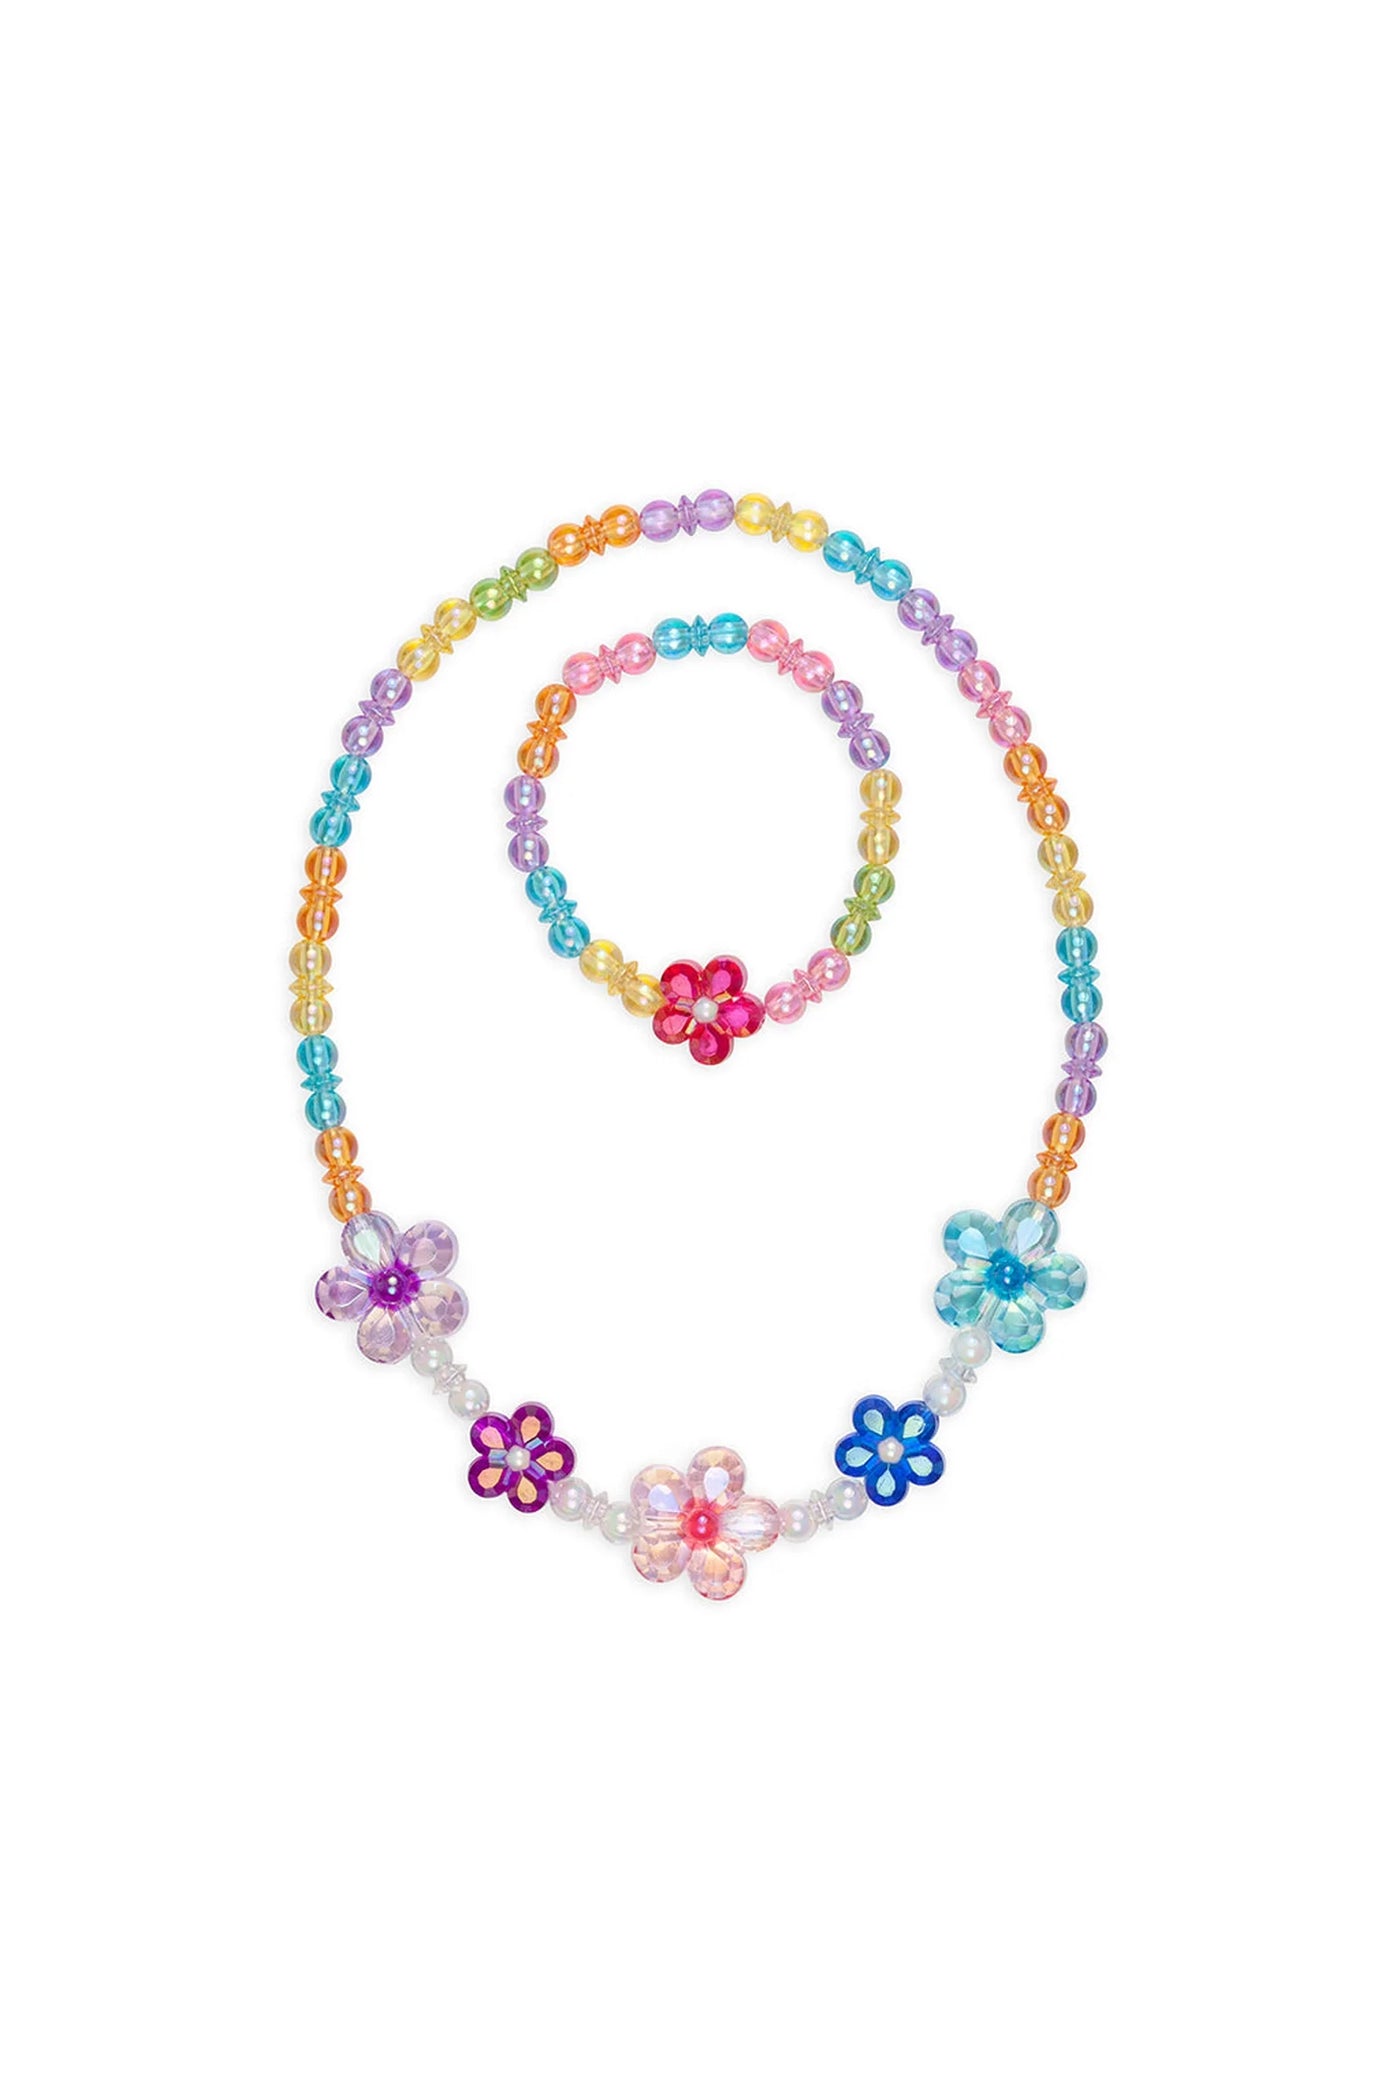 Blooming beads